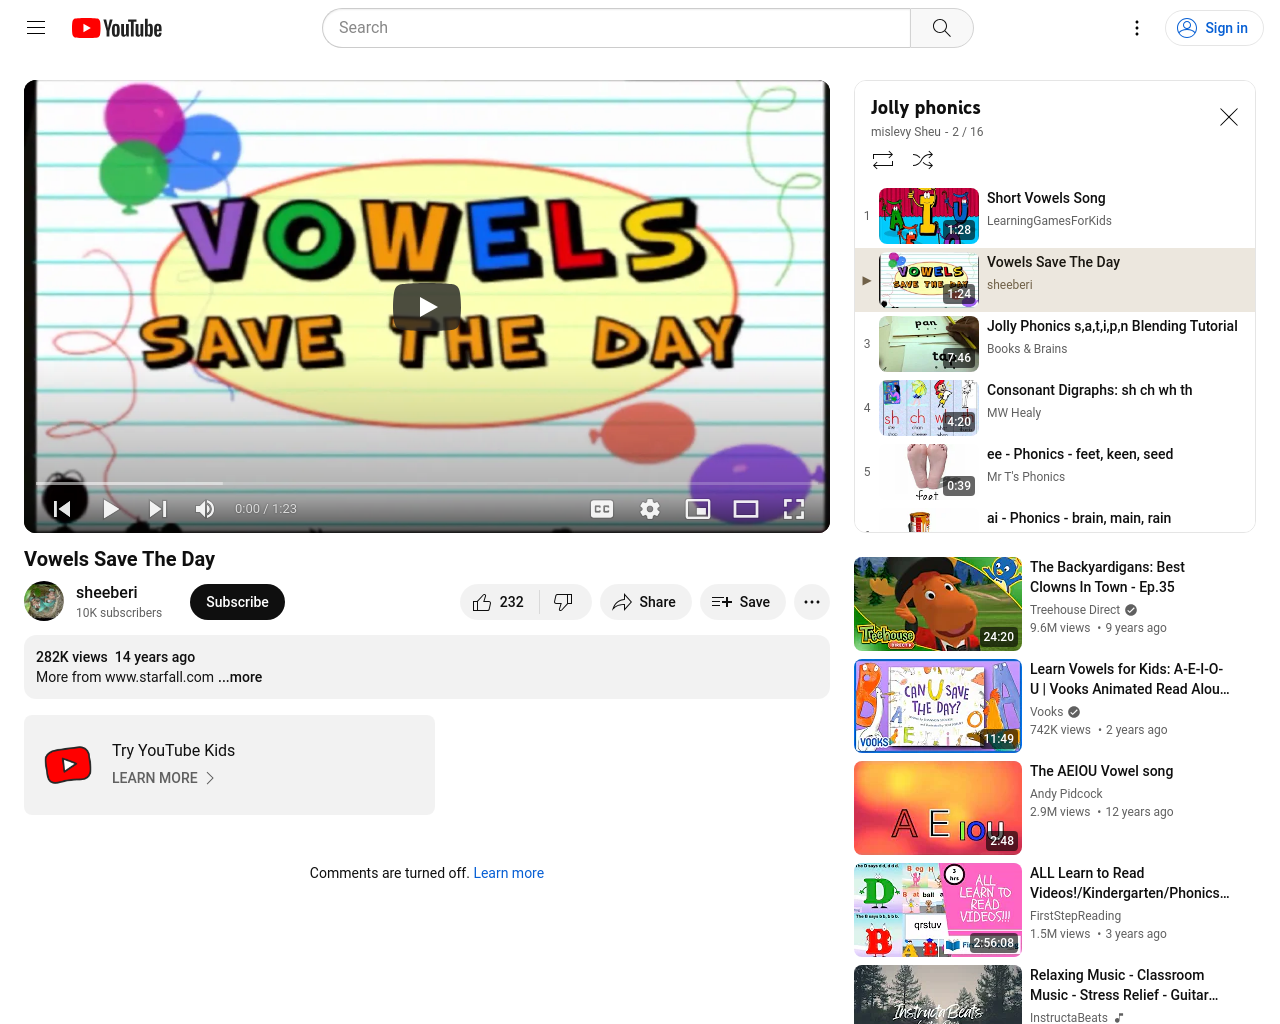 Long vowel sounds song from Jolly Phonics.